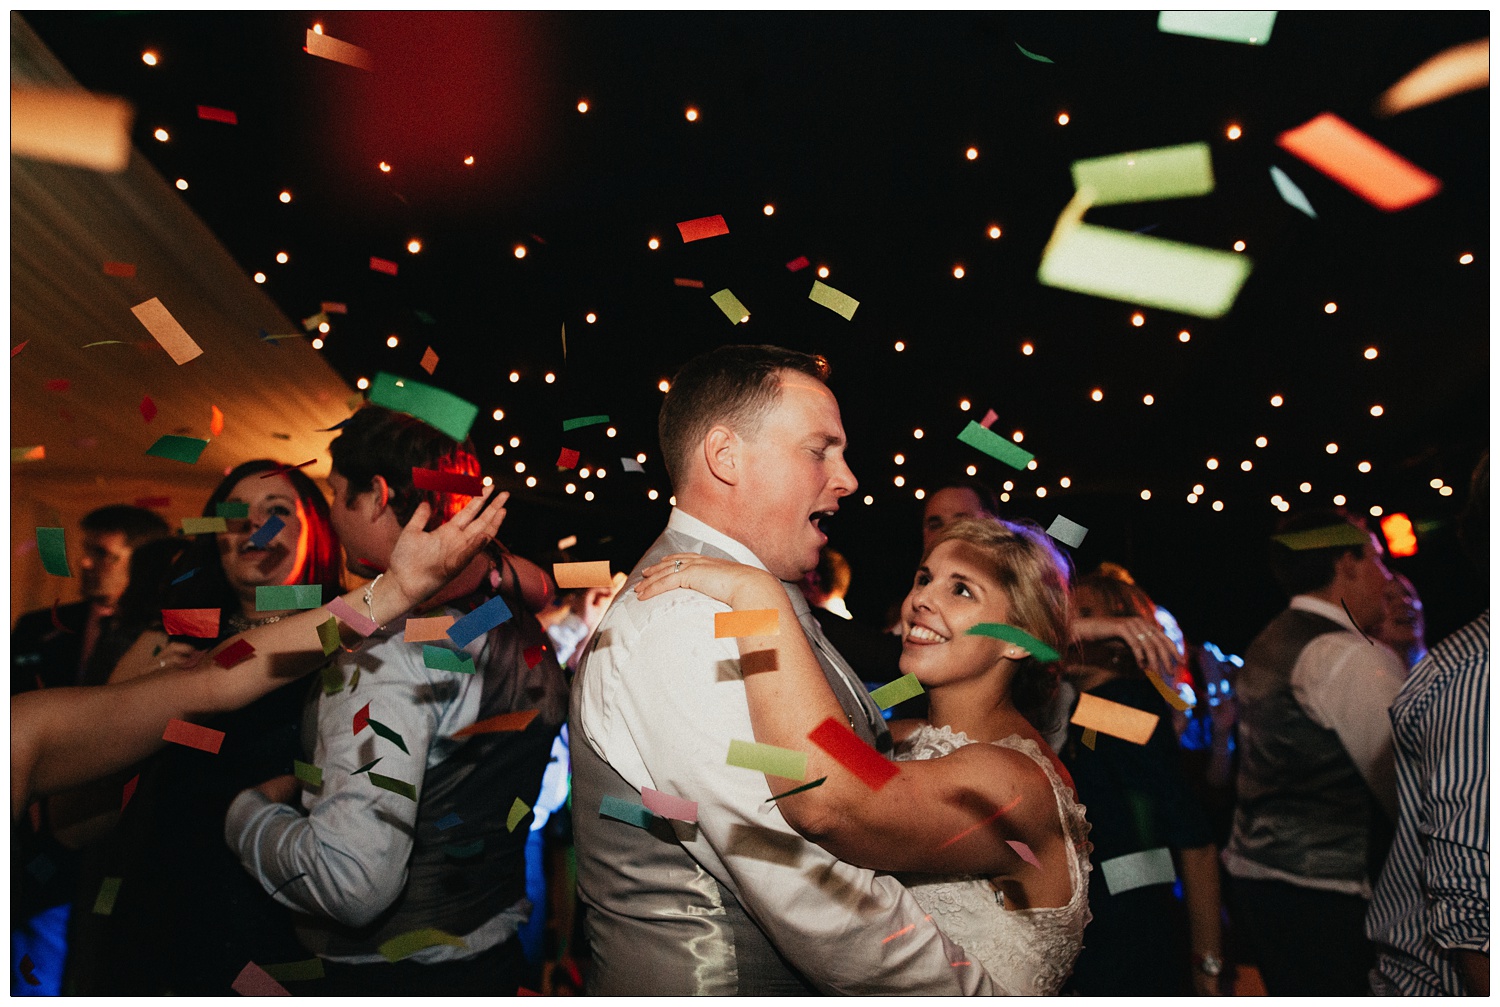 A confetti cannon goes off on a dance floor and showers the bride and groom in multi-coloured confetti. Wedding guests dance around them.